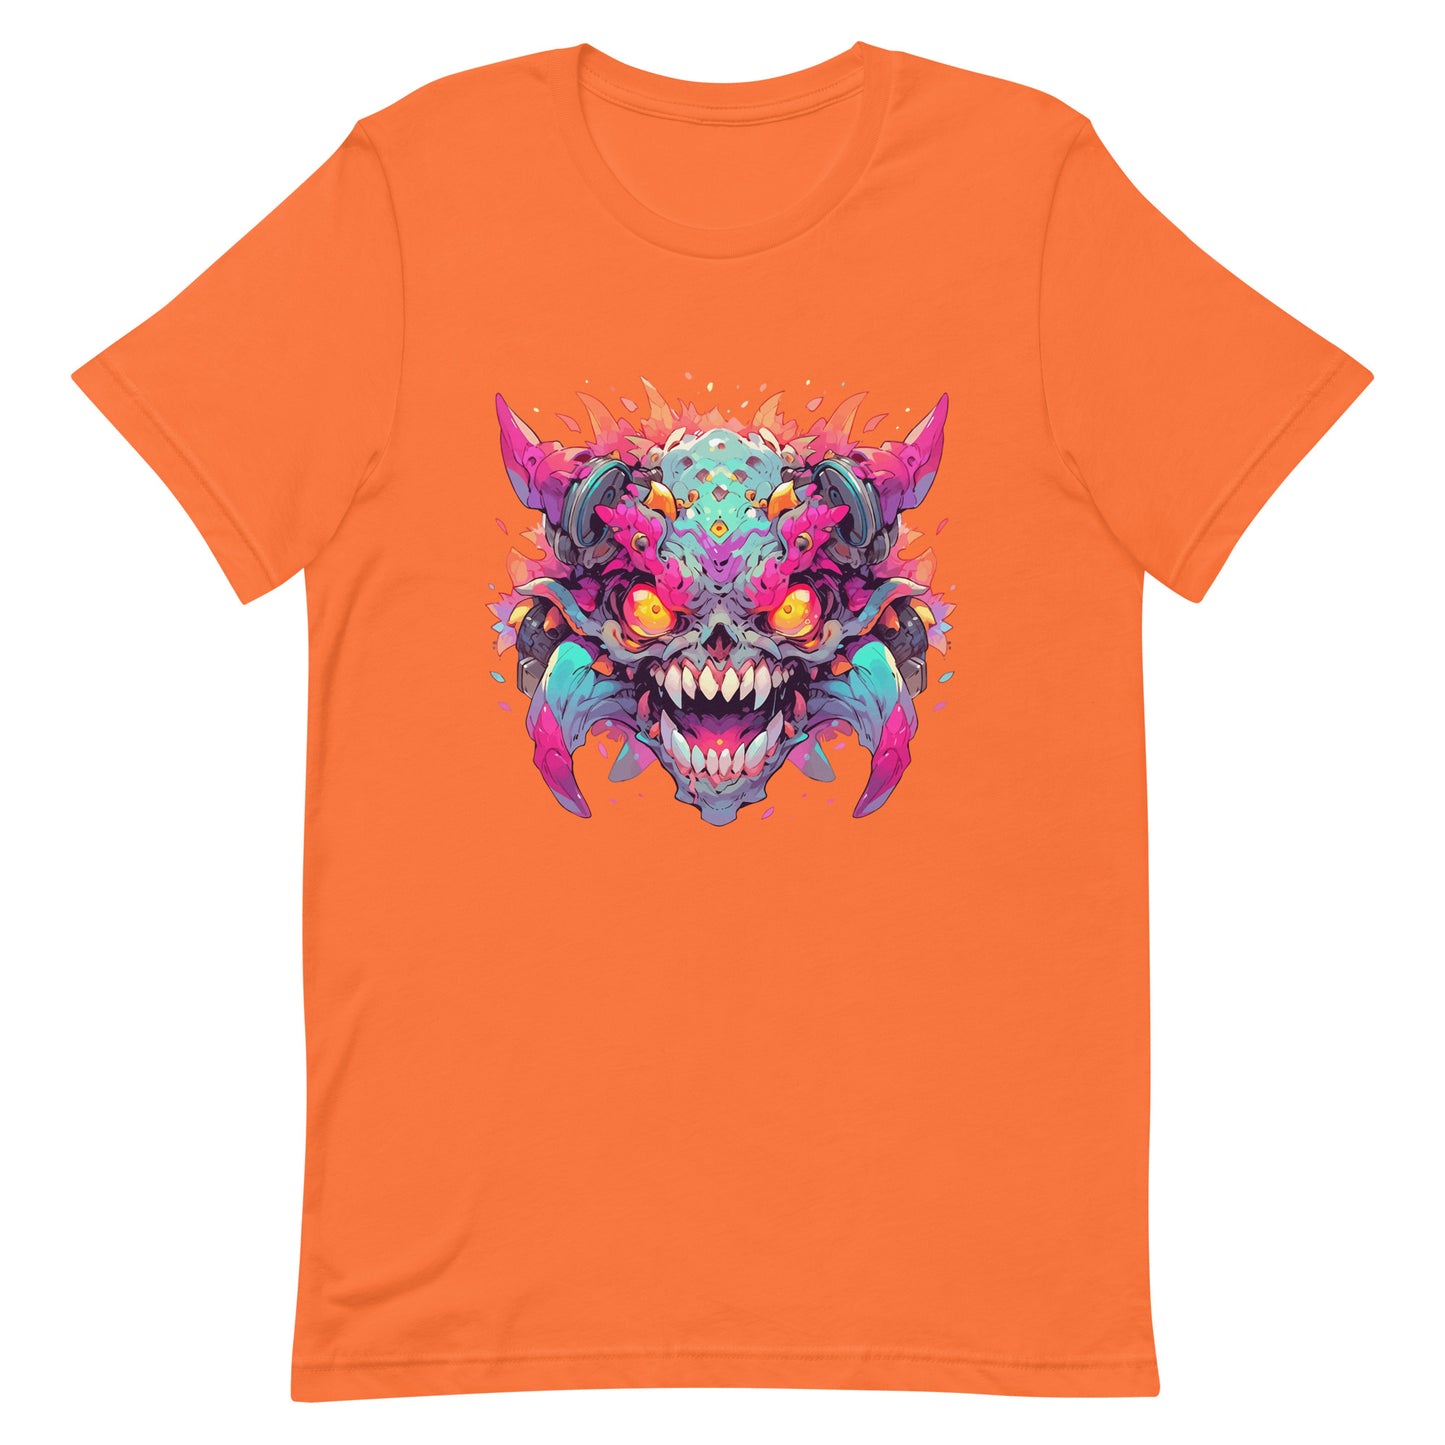 Horned and toothy monster, Crazy colorful illustration, Fantastic yellow evil eyes, Wild mutant - Unisex t-shirt